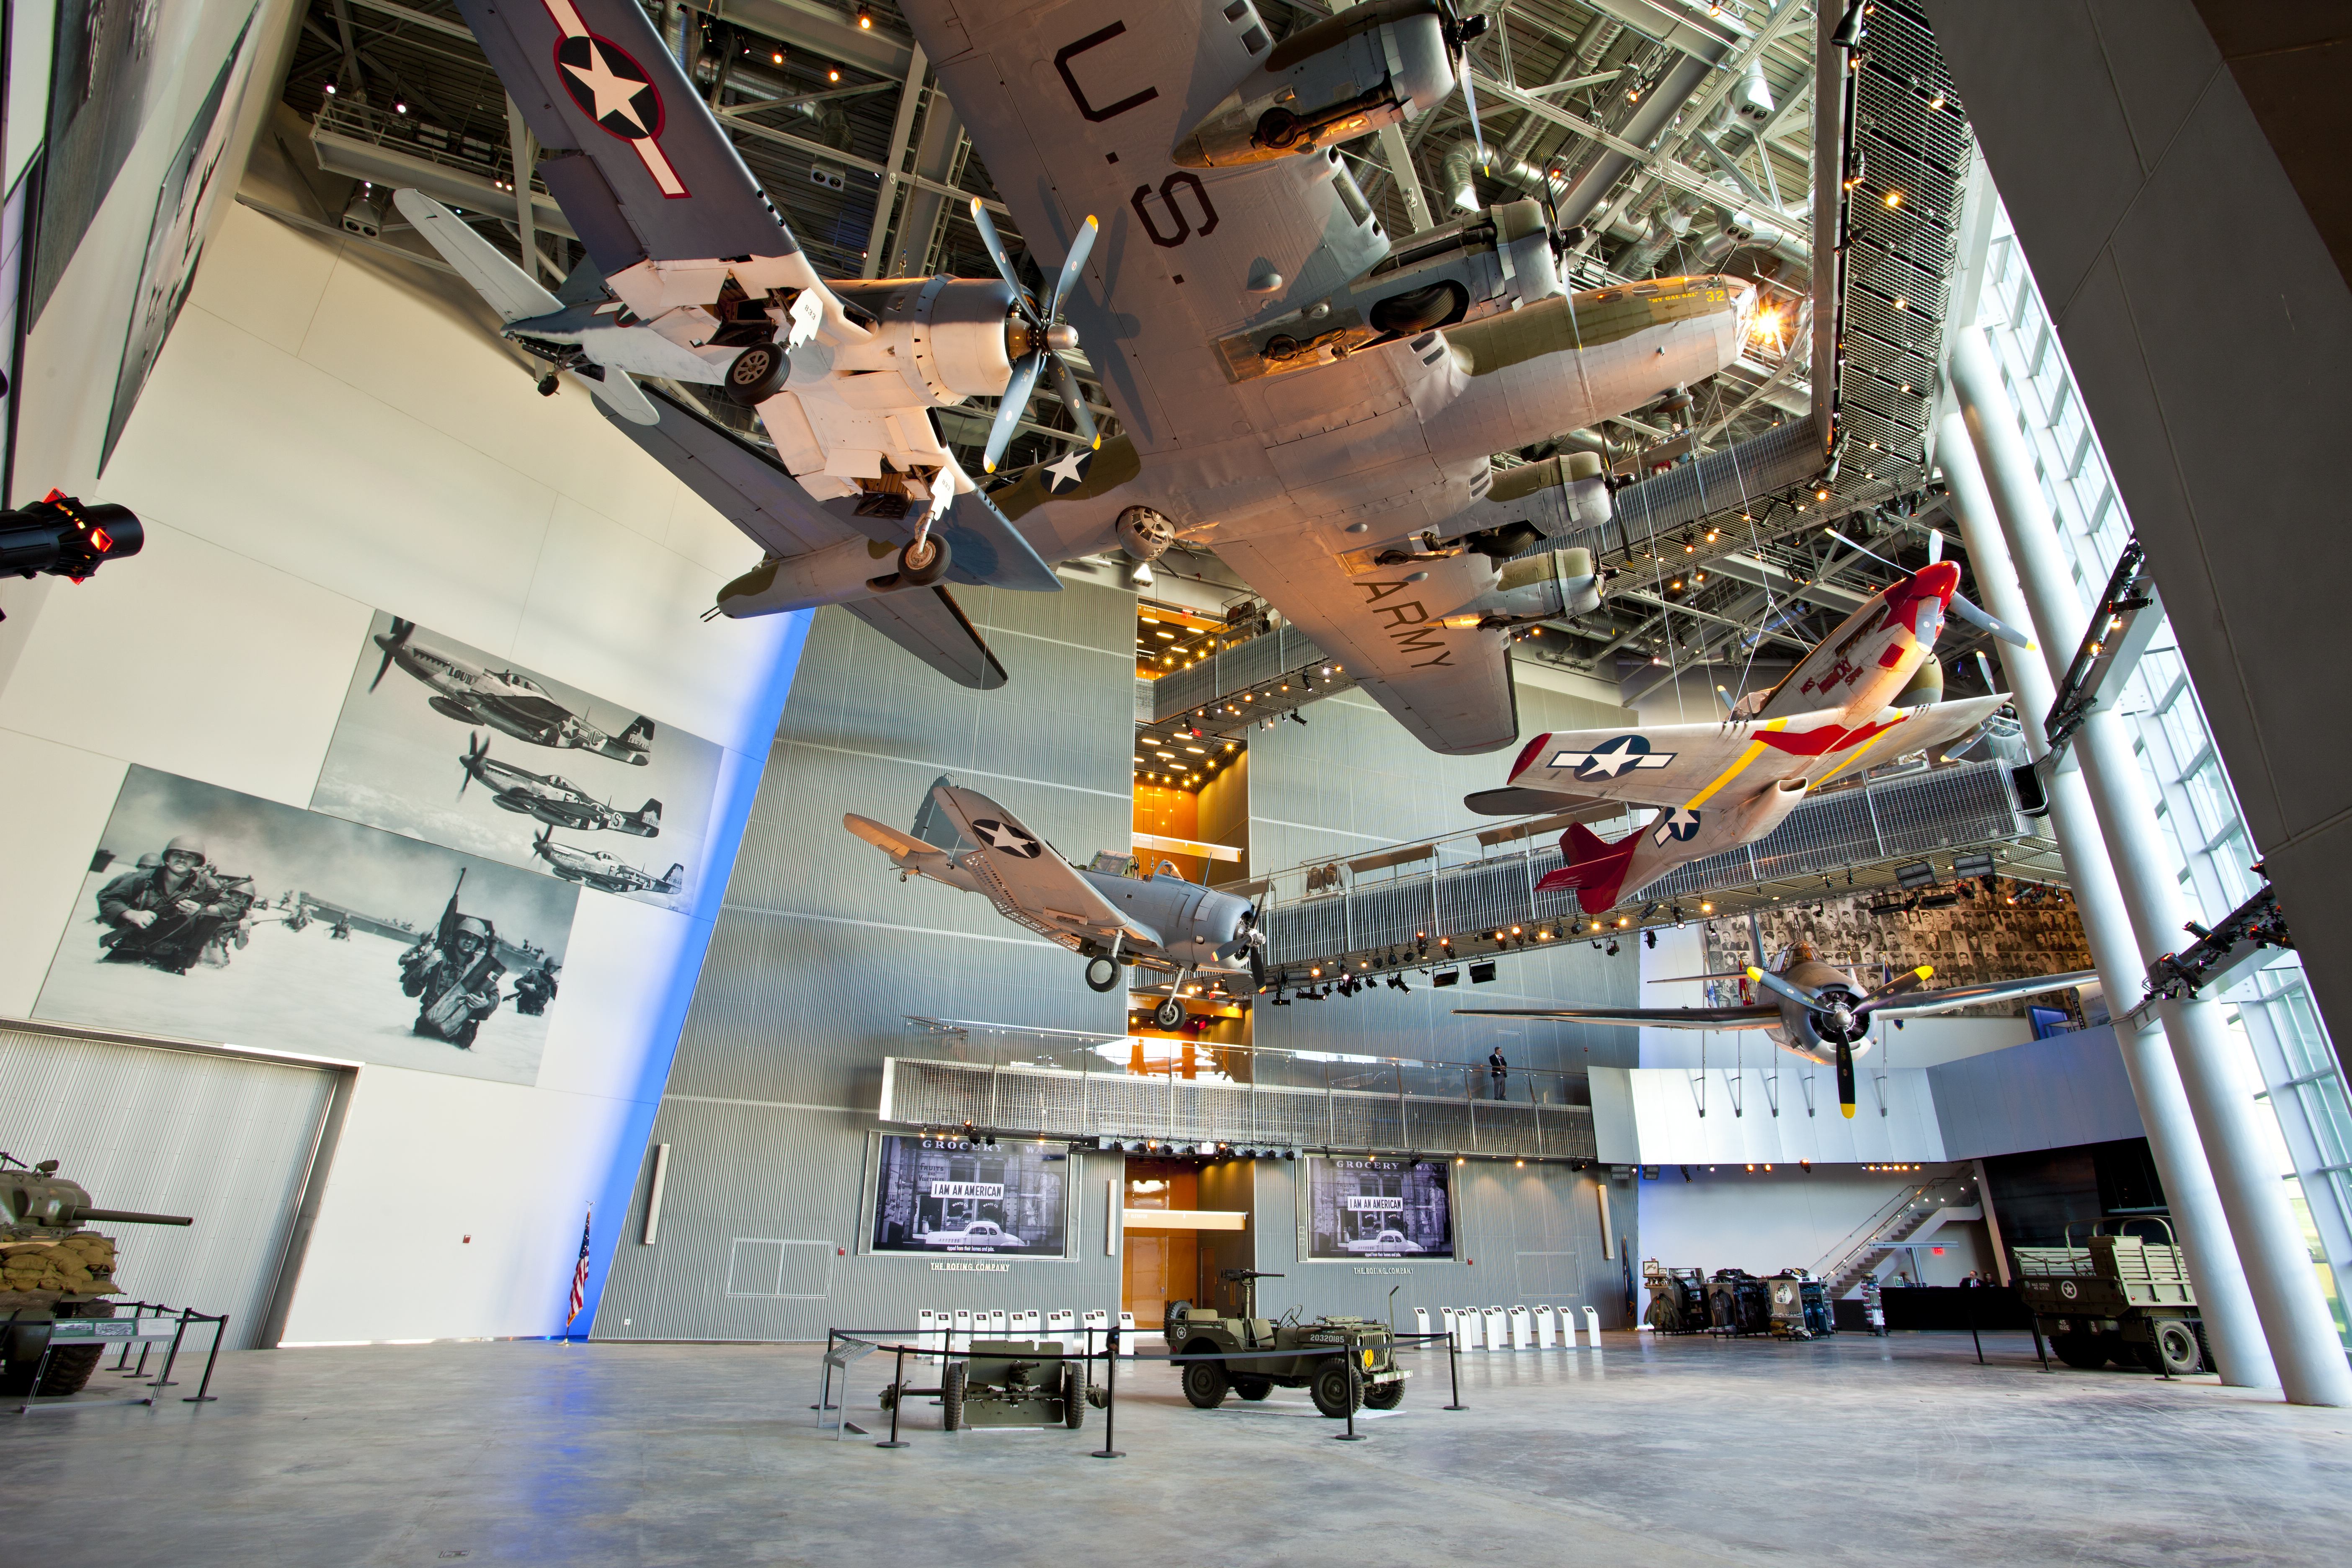 Underbelly of My Gal Sal and P-51 in US Freedom Pavilion